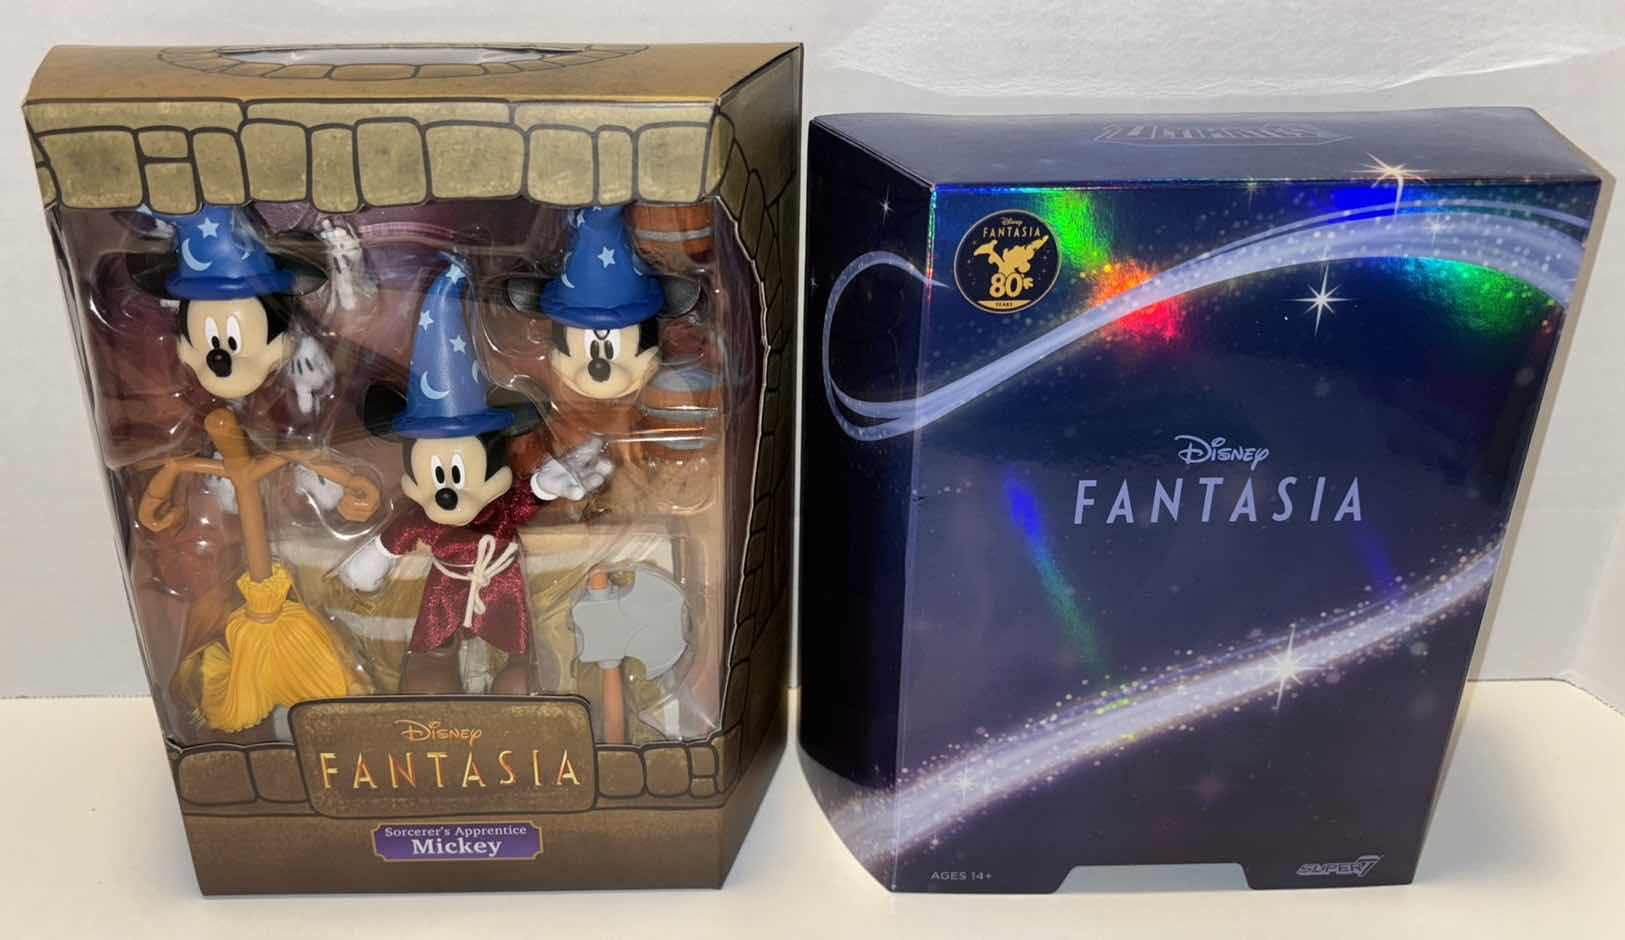 Photo 1 of NEW SUPER7 DISNEY FANTASIA 80 YEARS “SORCERER’S APPRENTICE MICKEY” ULTIMATES ACTION FIGURE & ACCESSORIES